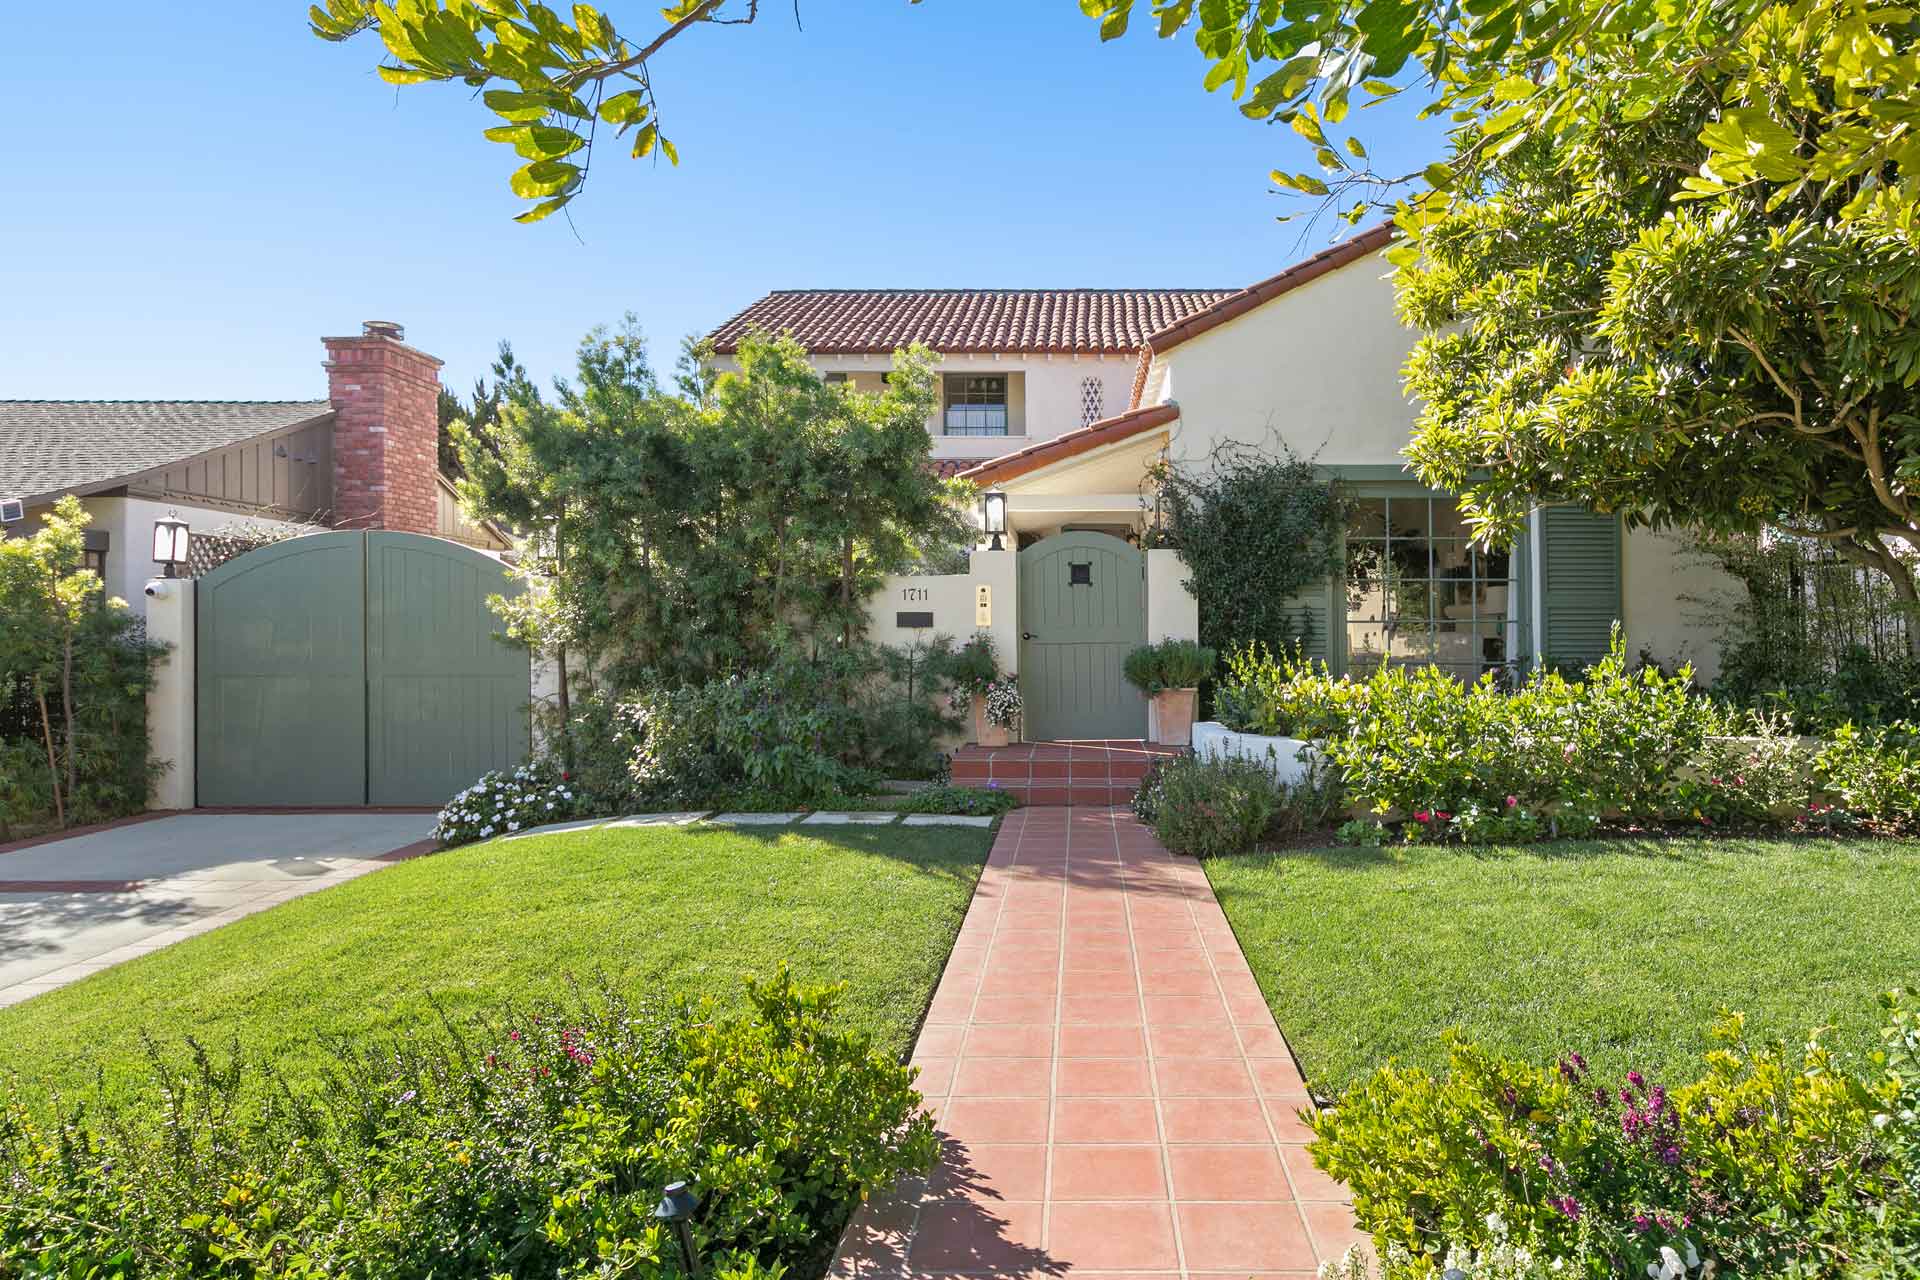 Emma Stone’s LA Home Is Up For Sale